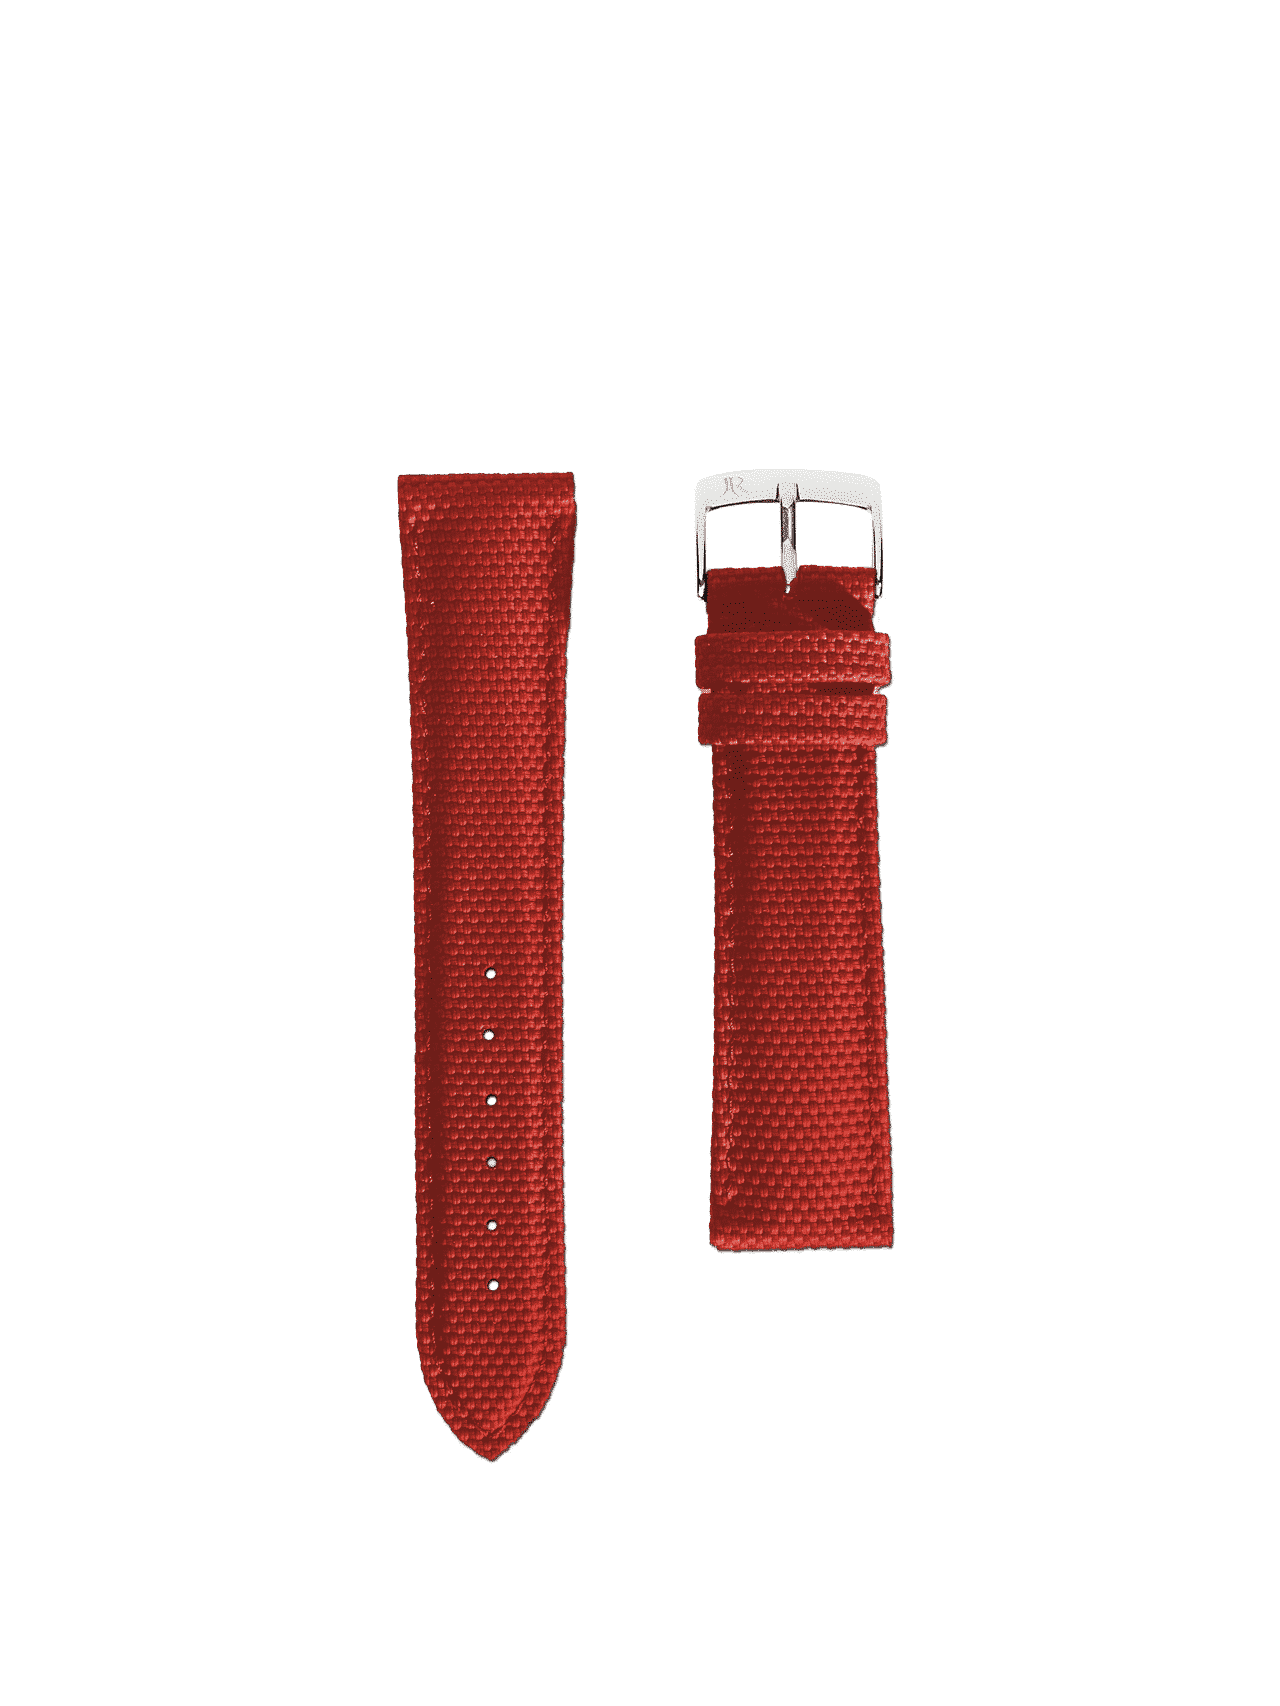 Classic watch band rubber red men